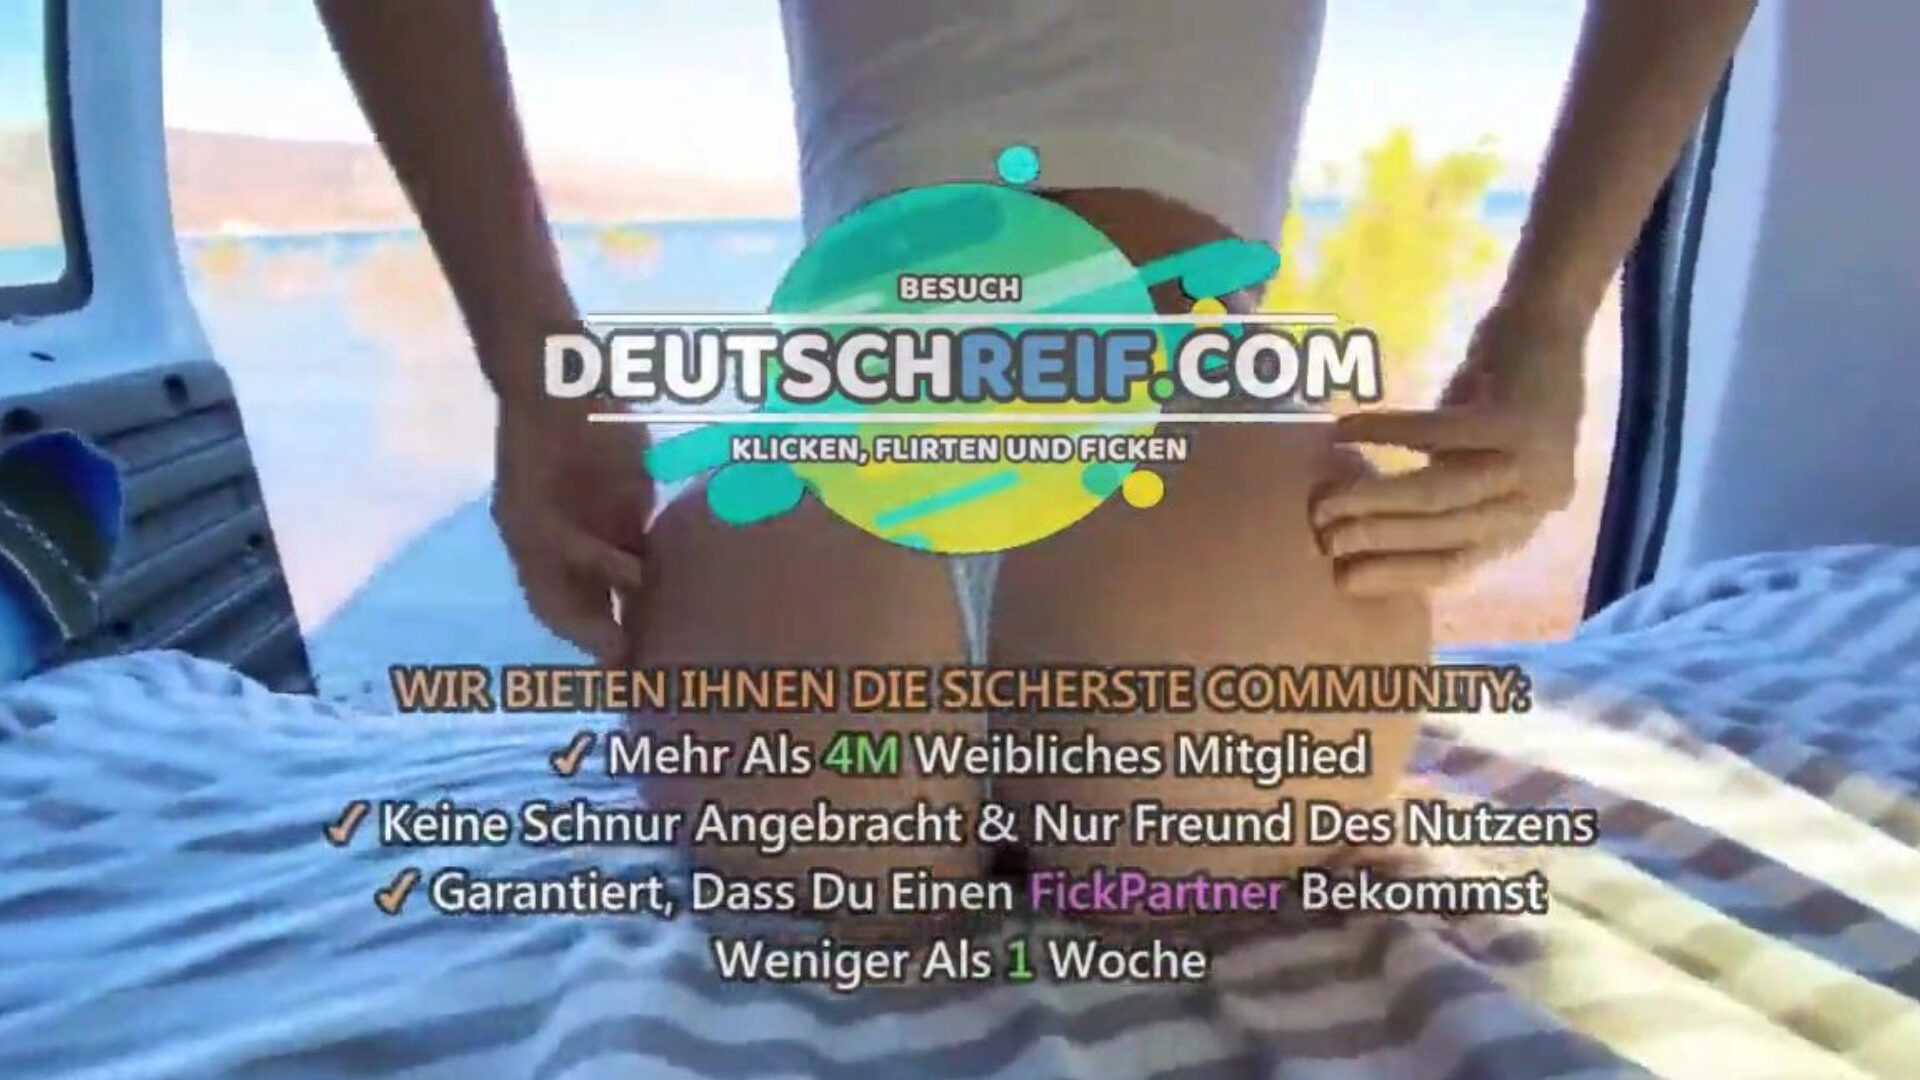 Er Fickt Mich in Van Am Oeffentlichen Strand: Free Porn 28 Watch Er Fickt Mich in Van Am Oeffentlichen Strand episode on xHamster - the ultimate archive of free-for-all German German Mature HD hard-core porn tube movie scenes